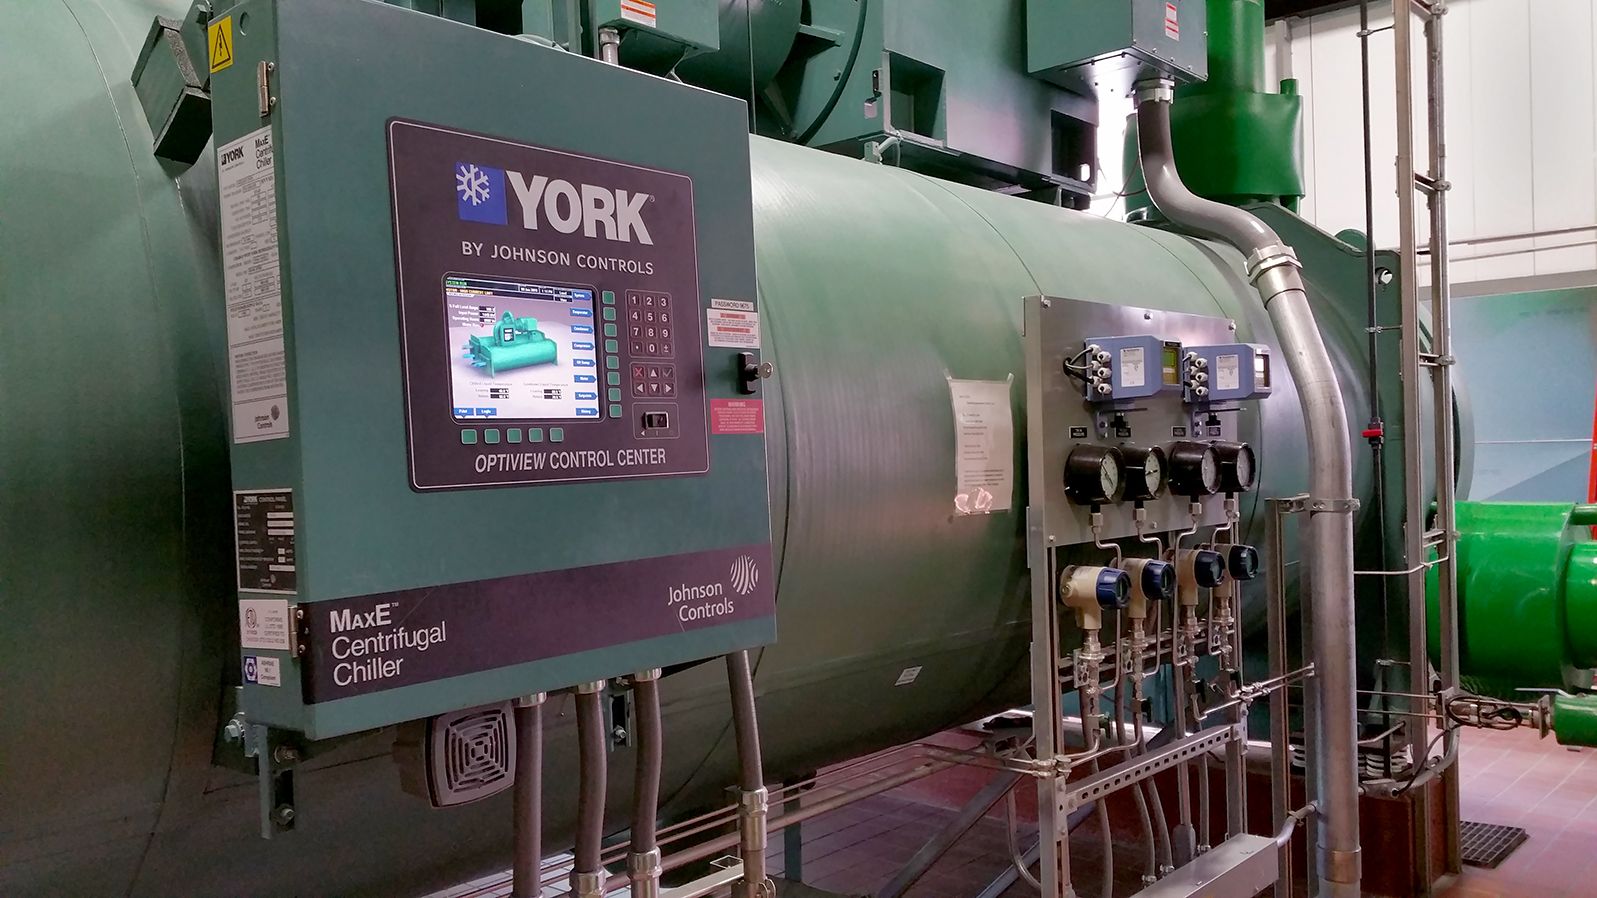 York water chiller with status display panel and data feed